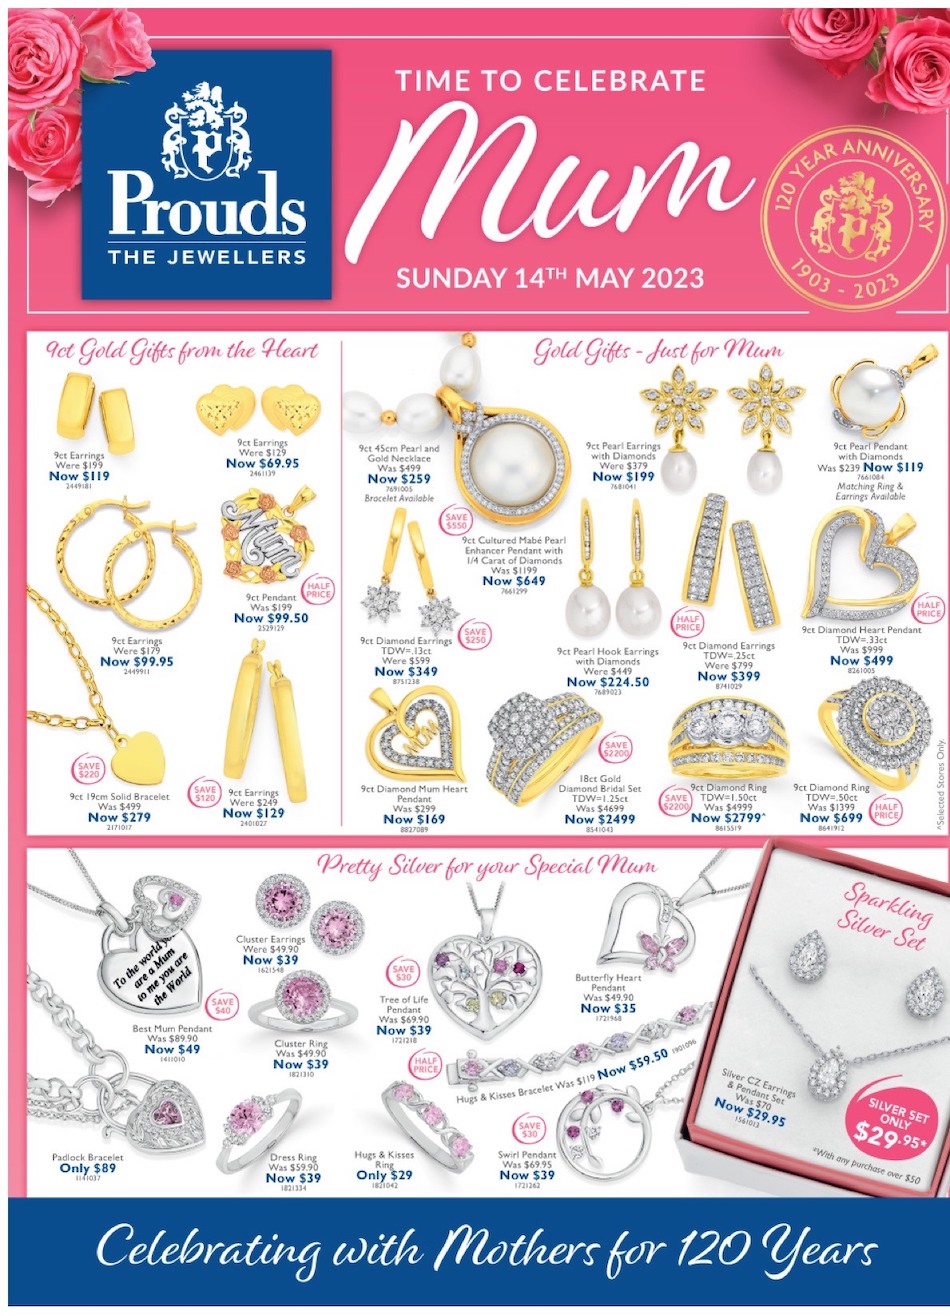 Prouds Catalogue